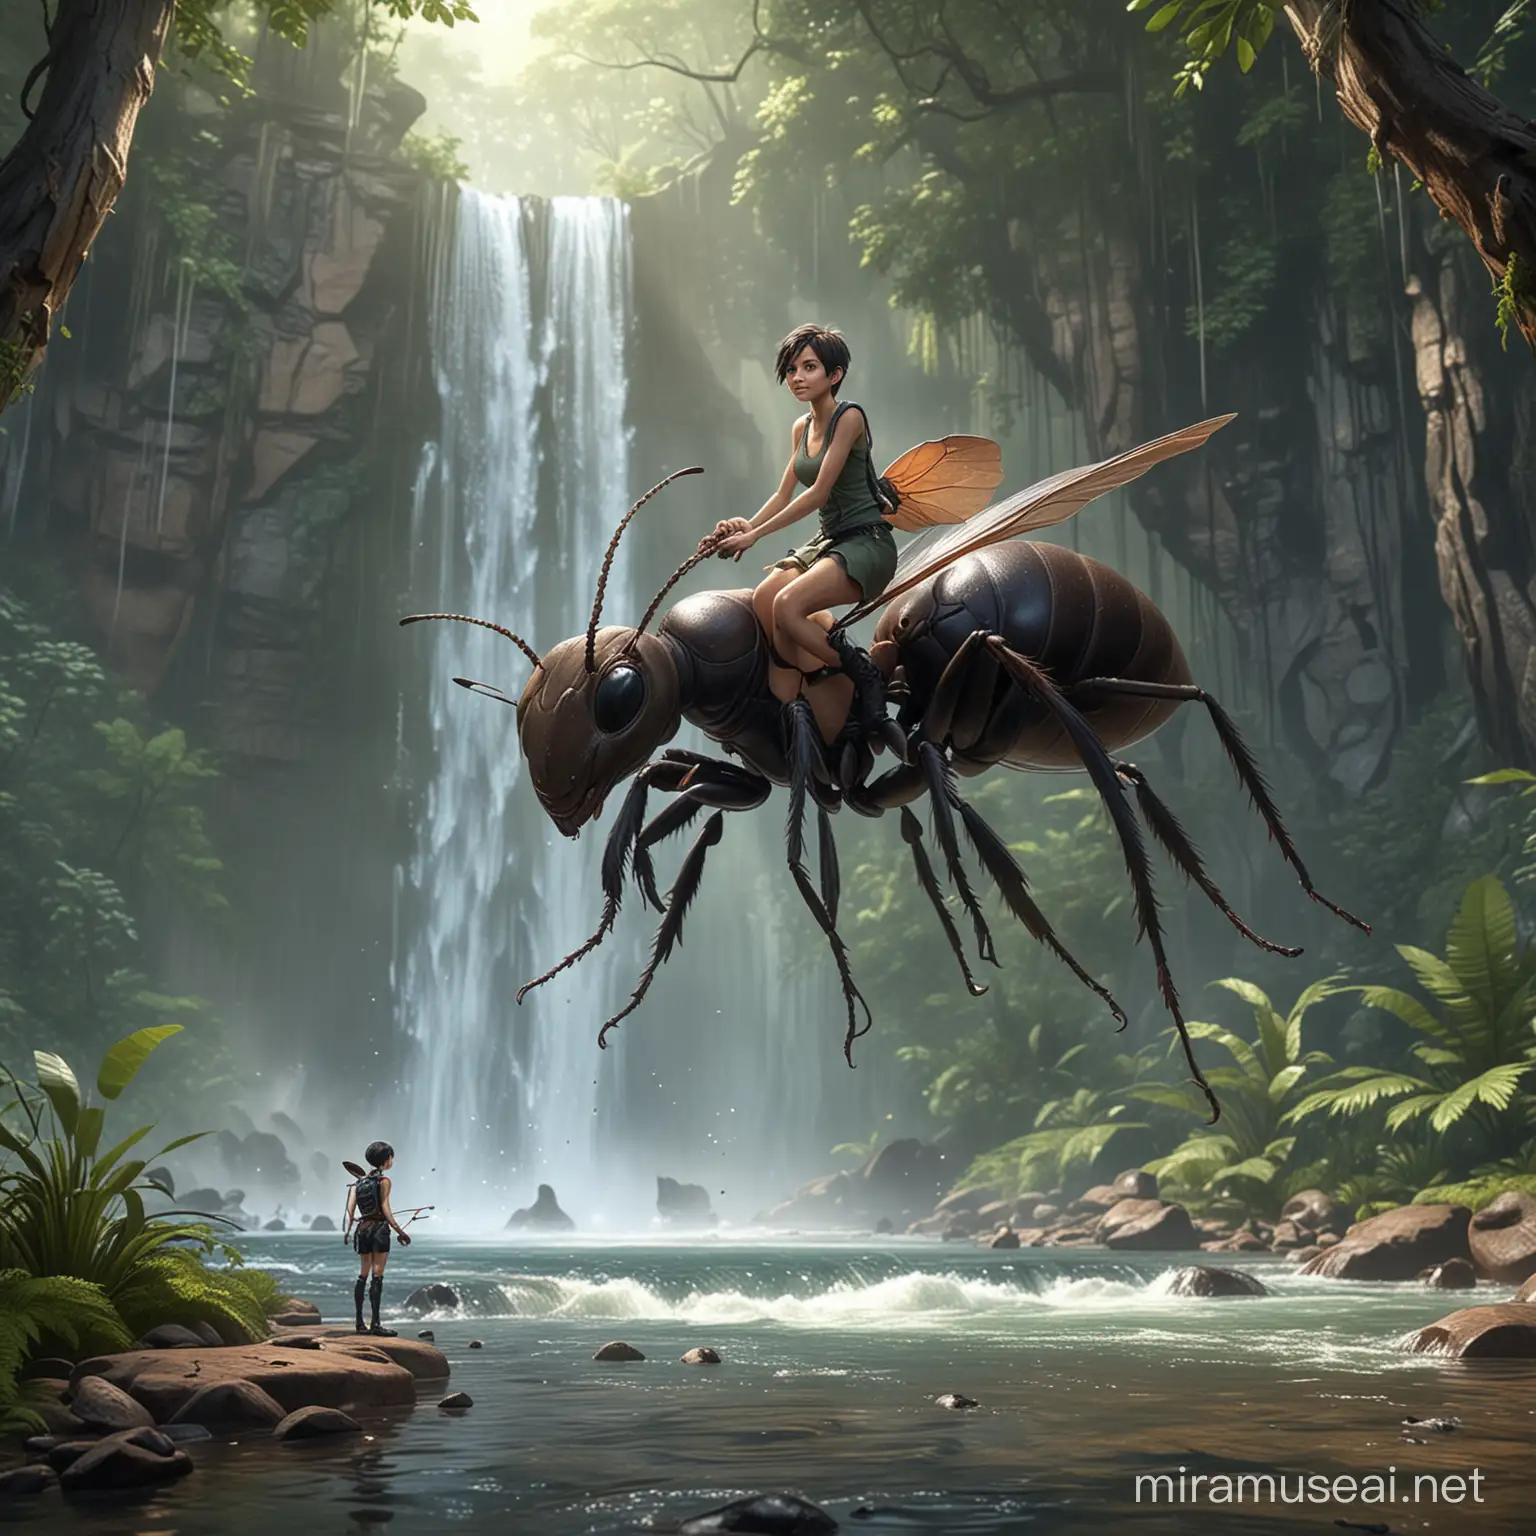 Enchanting Pixie Riding Giant Ant in Lush Forest with Waterfall